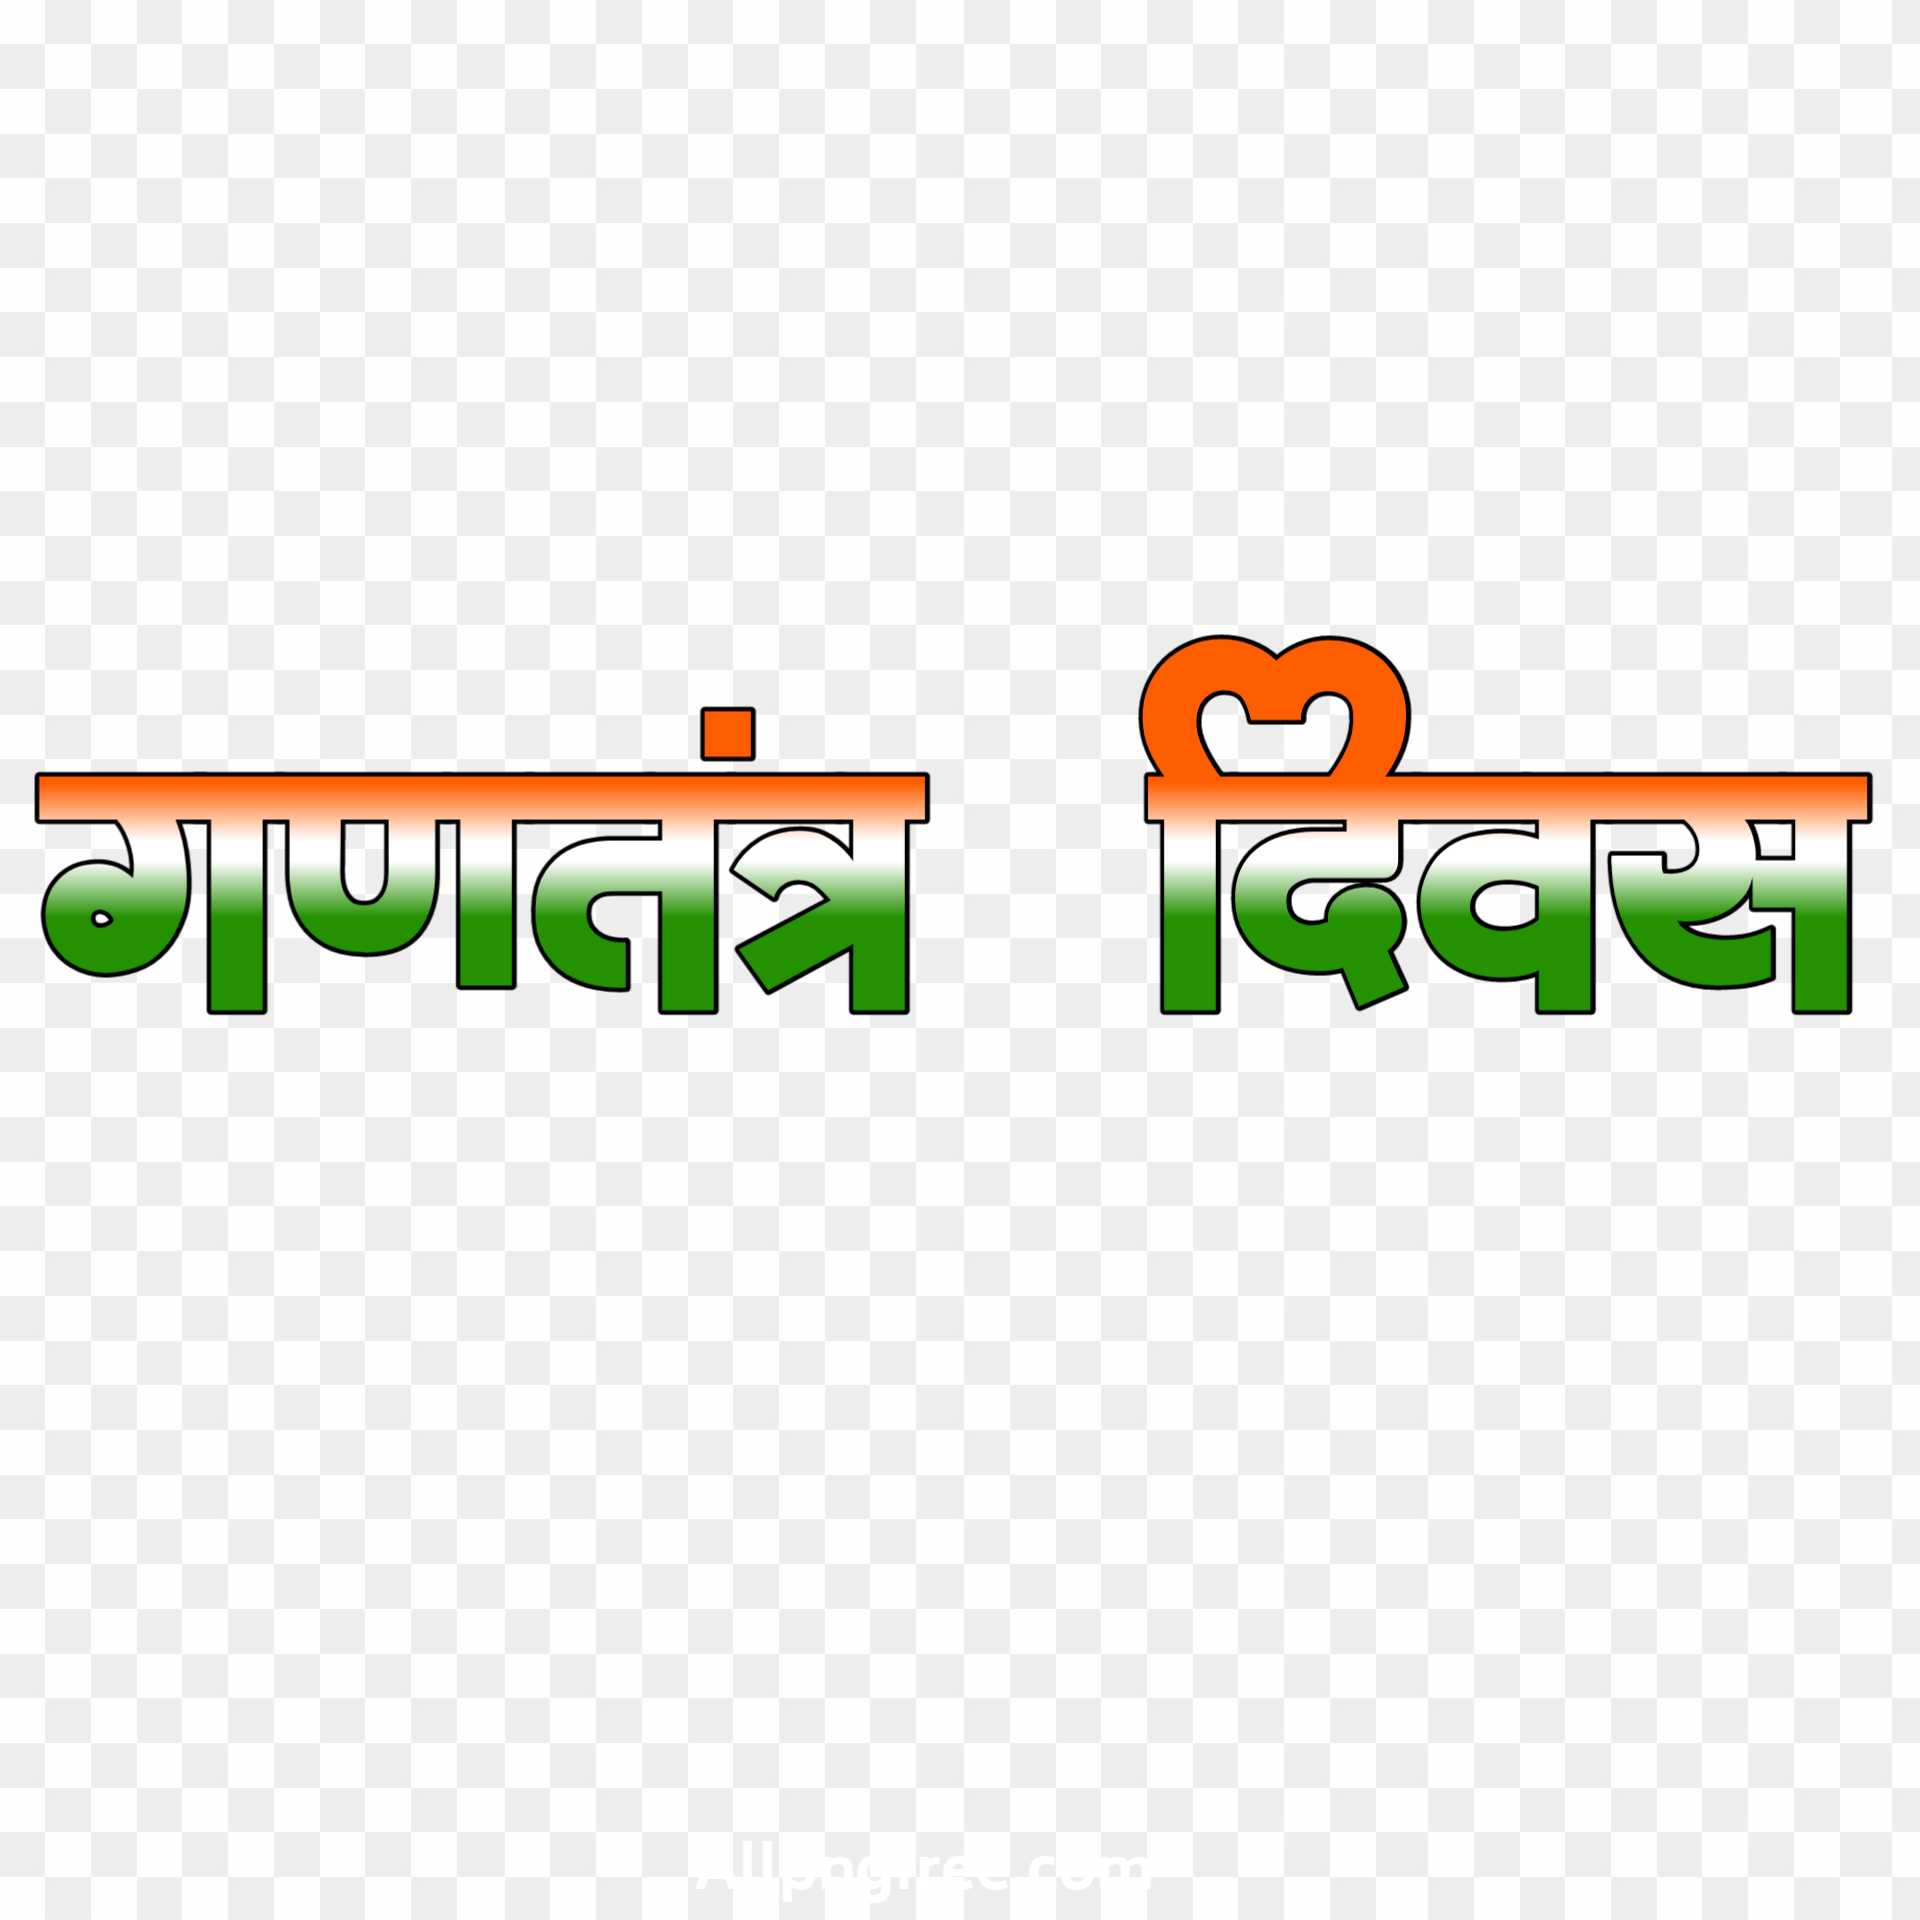 26 January republic Day in Hindi text PNG images download